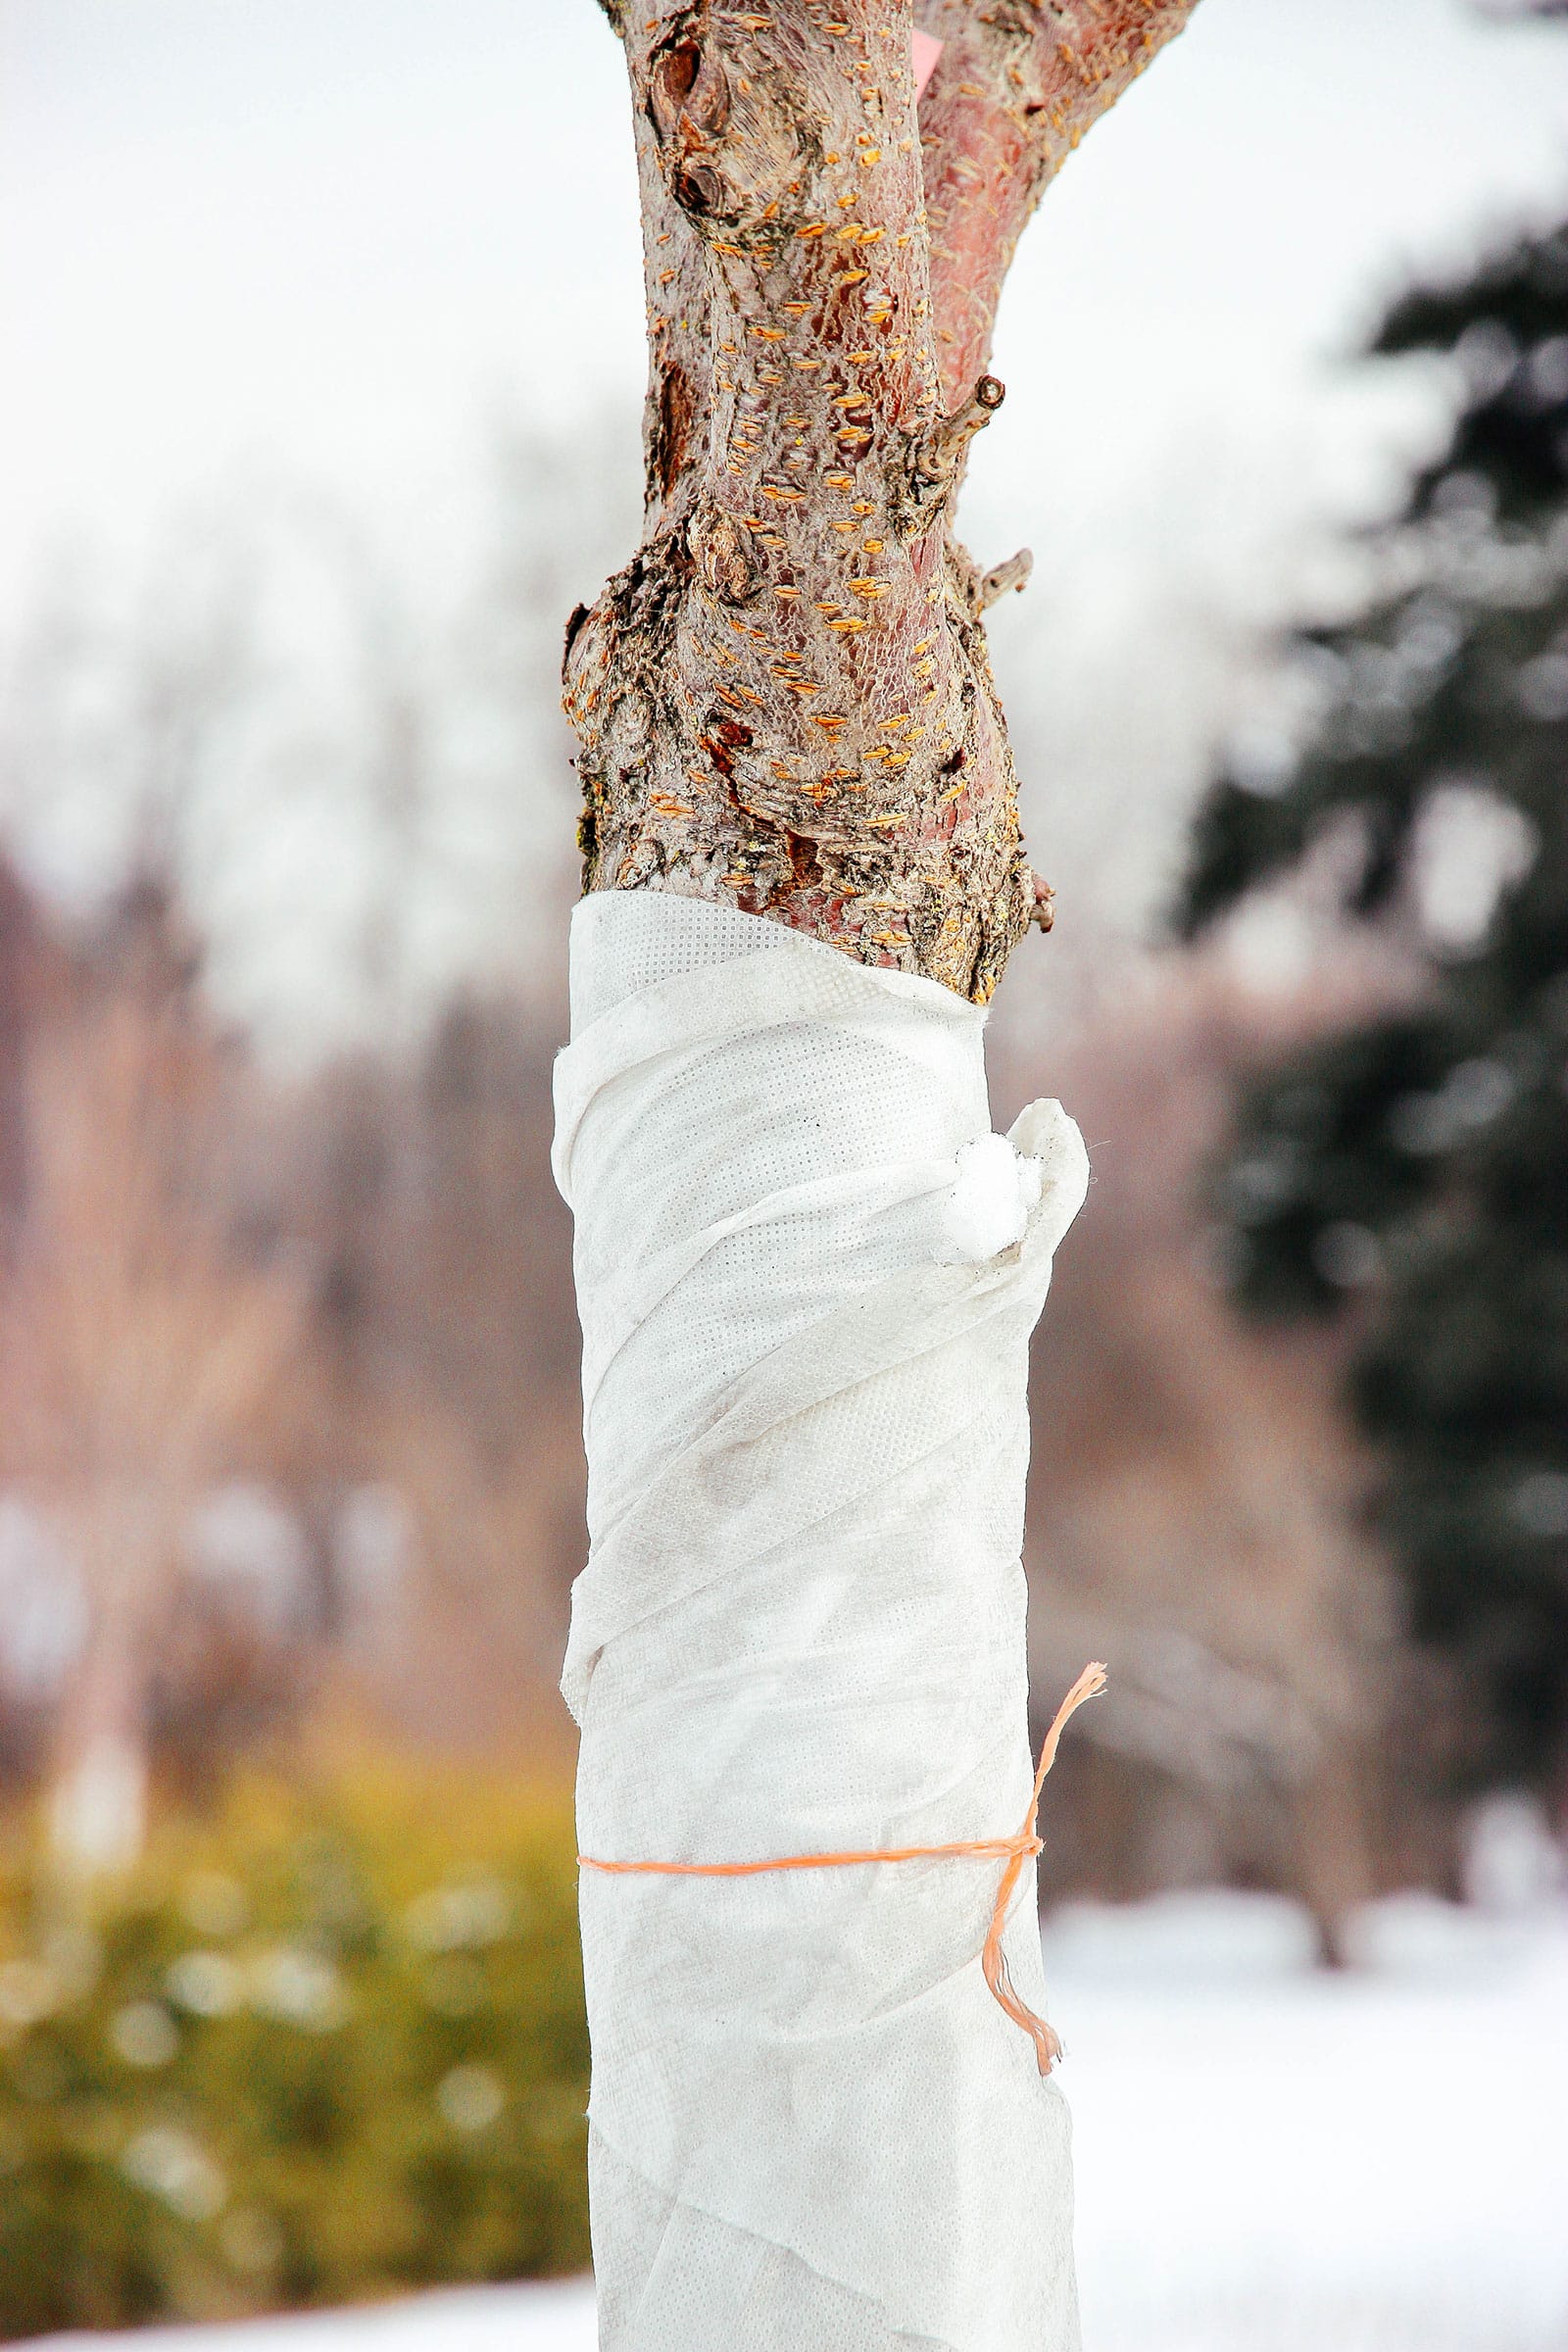 Close-up of tree trunk wrapped in a white cloth to protect against sunscald in winter